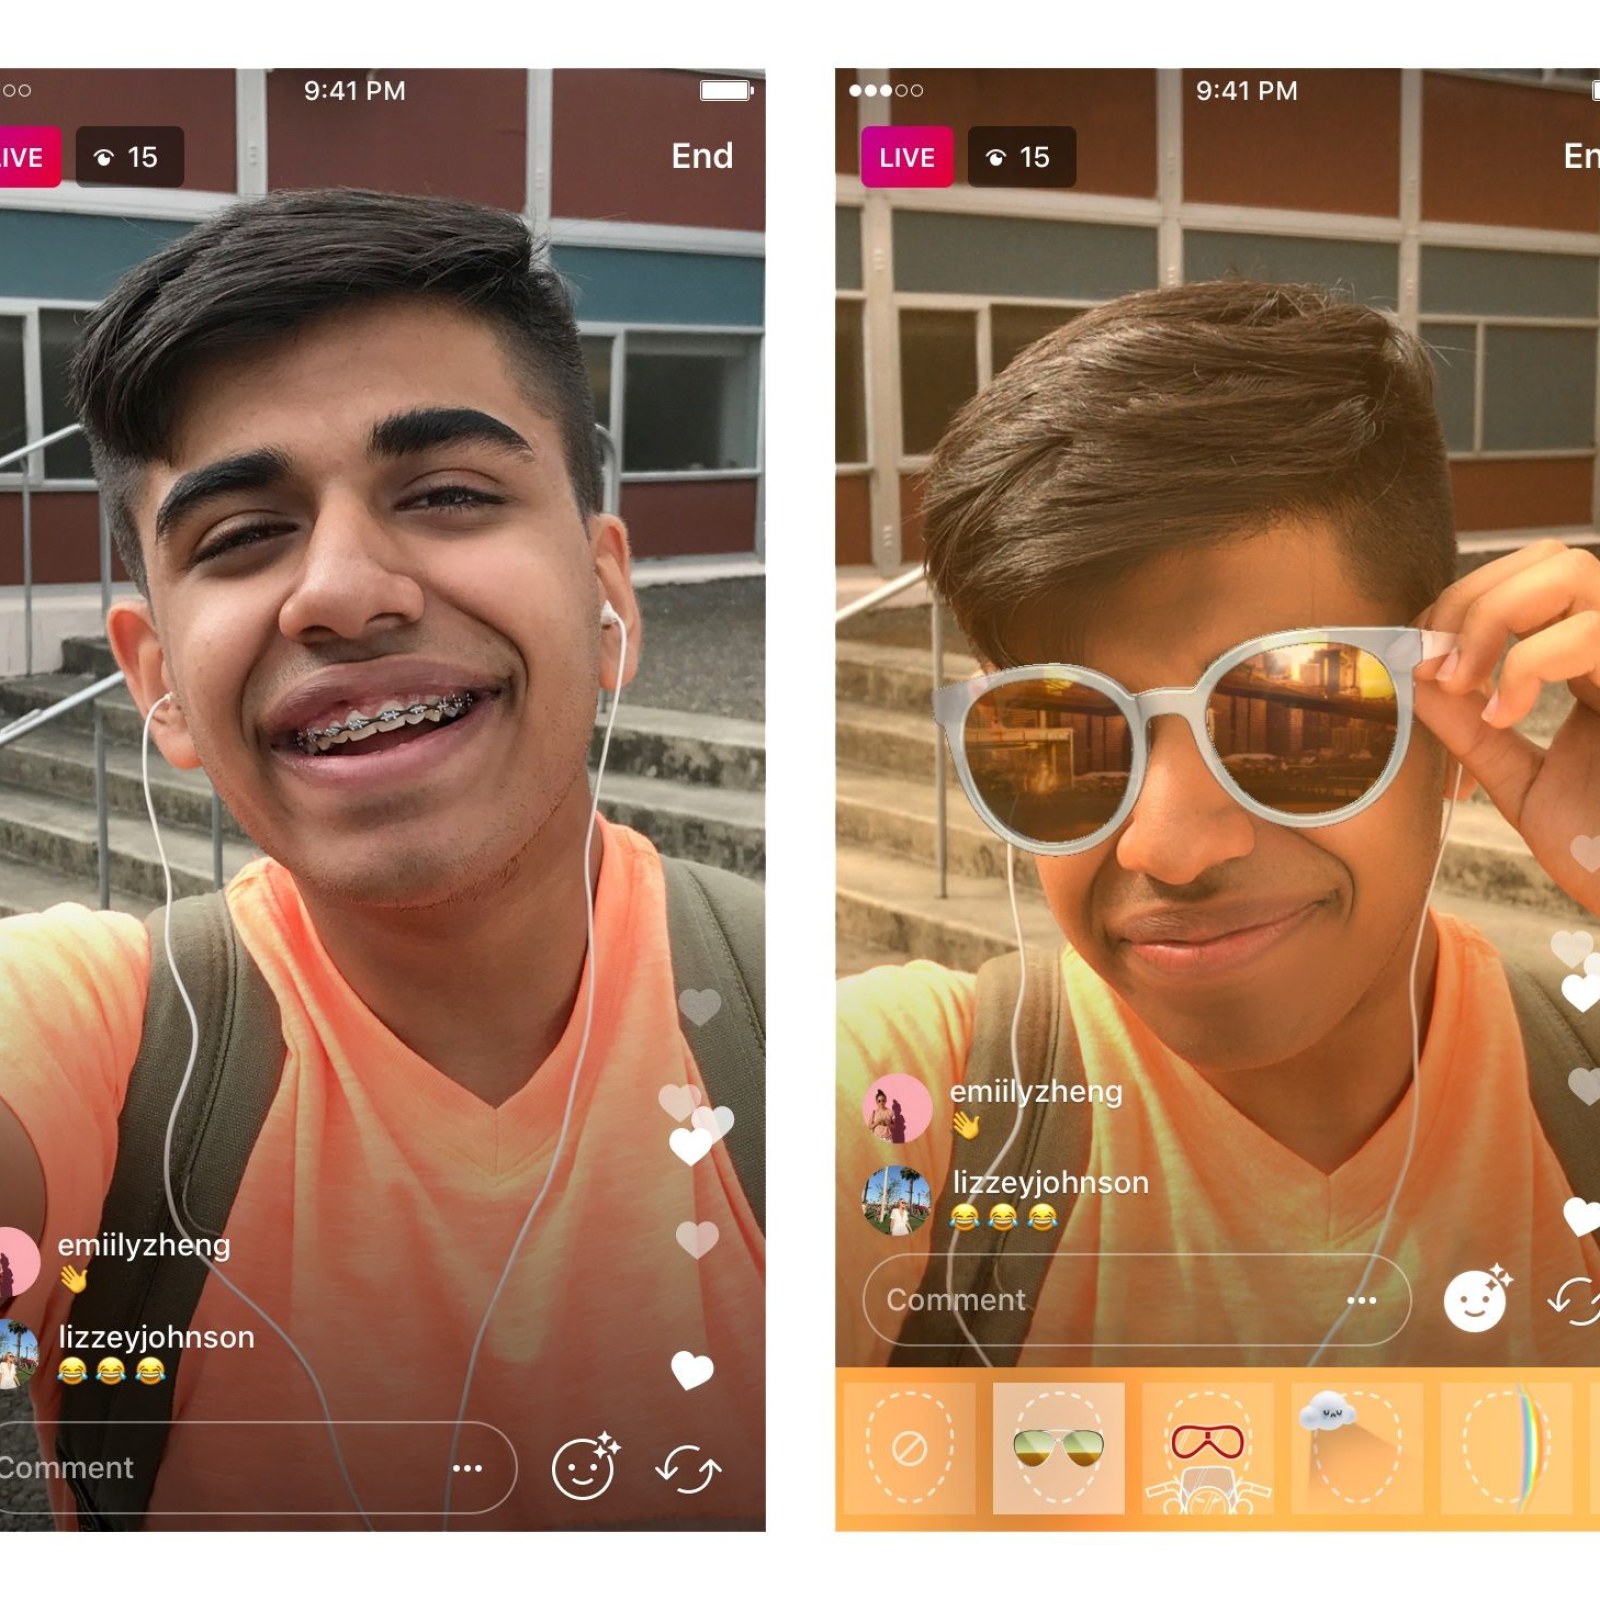 preambule Tegen lijden Instagram Update: How To Use Face Filters While Using Live